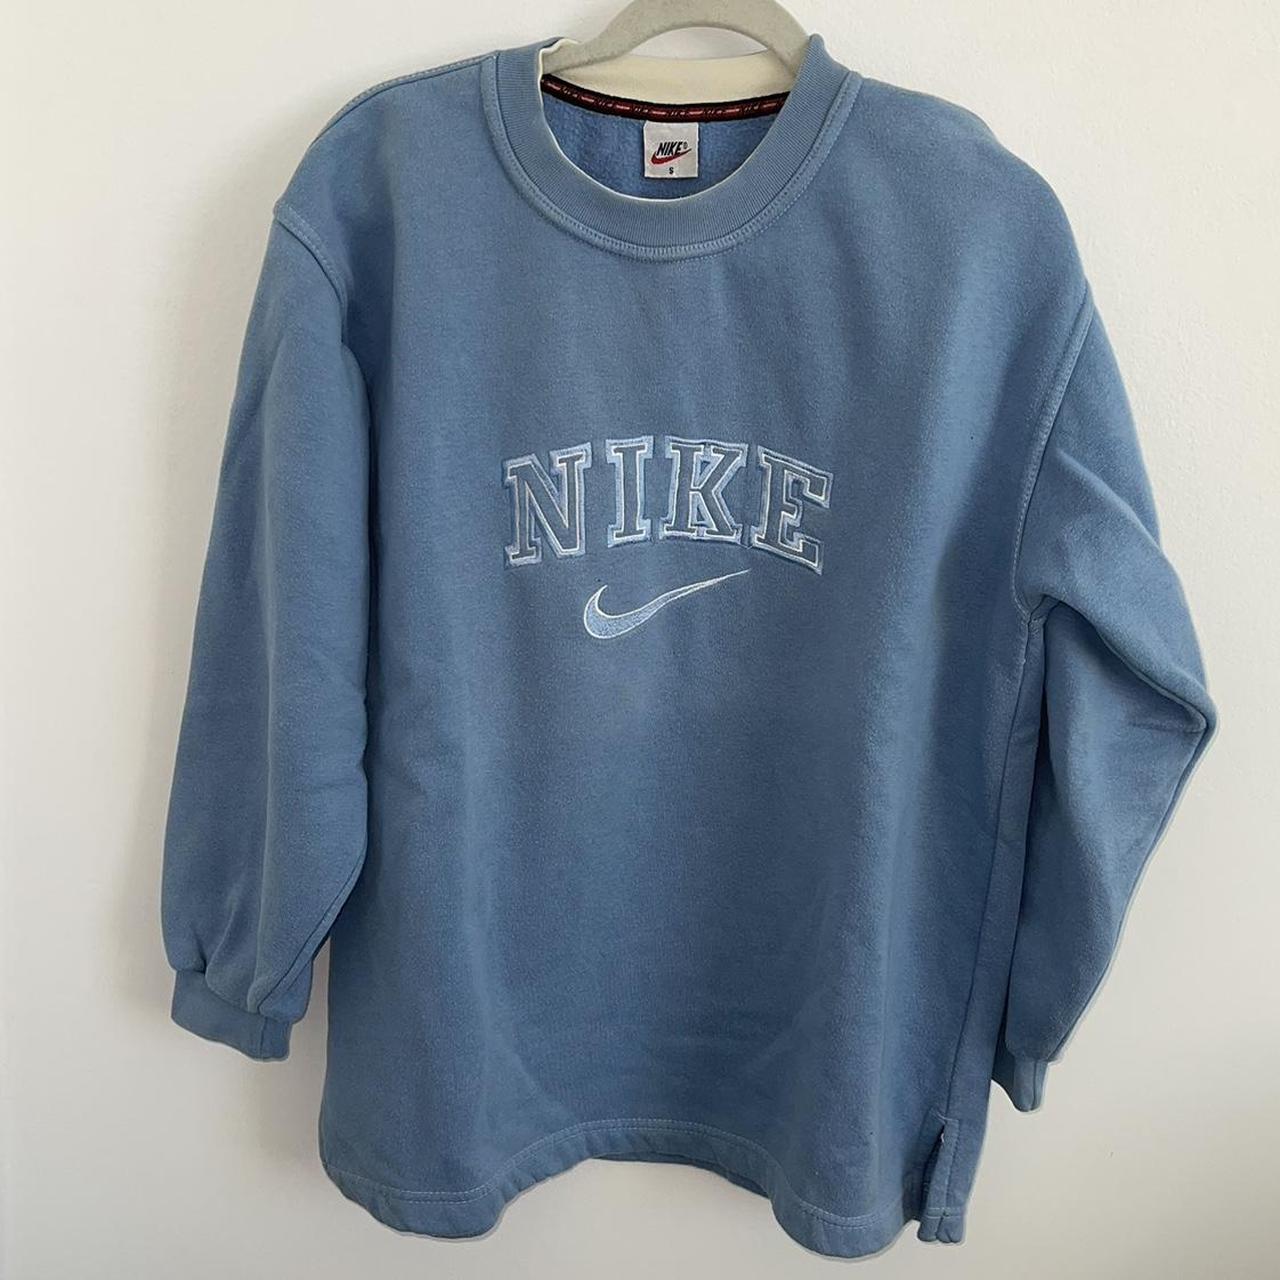 Vintage Nike Spell out crewneck Size small 🫶 - Depop